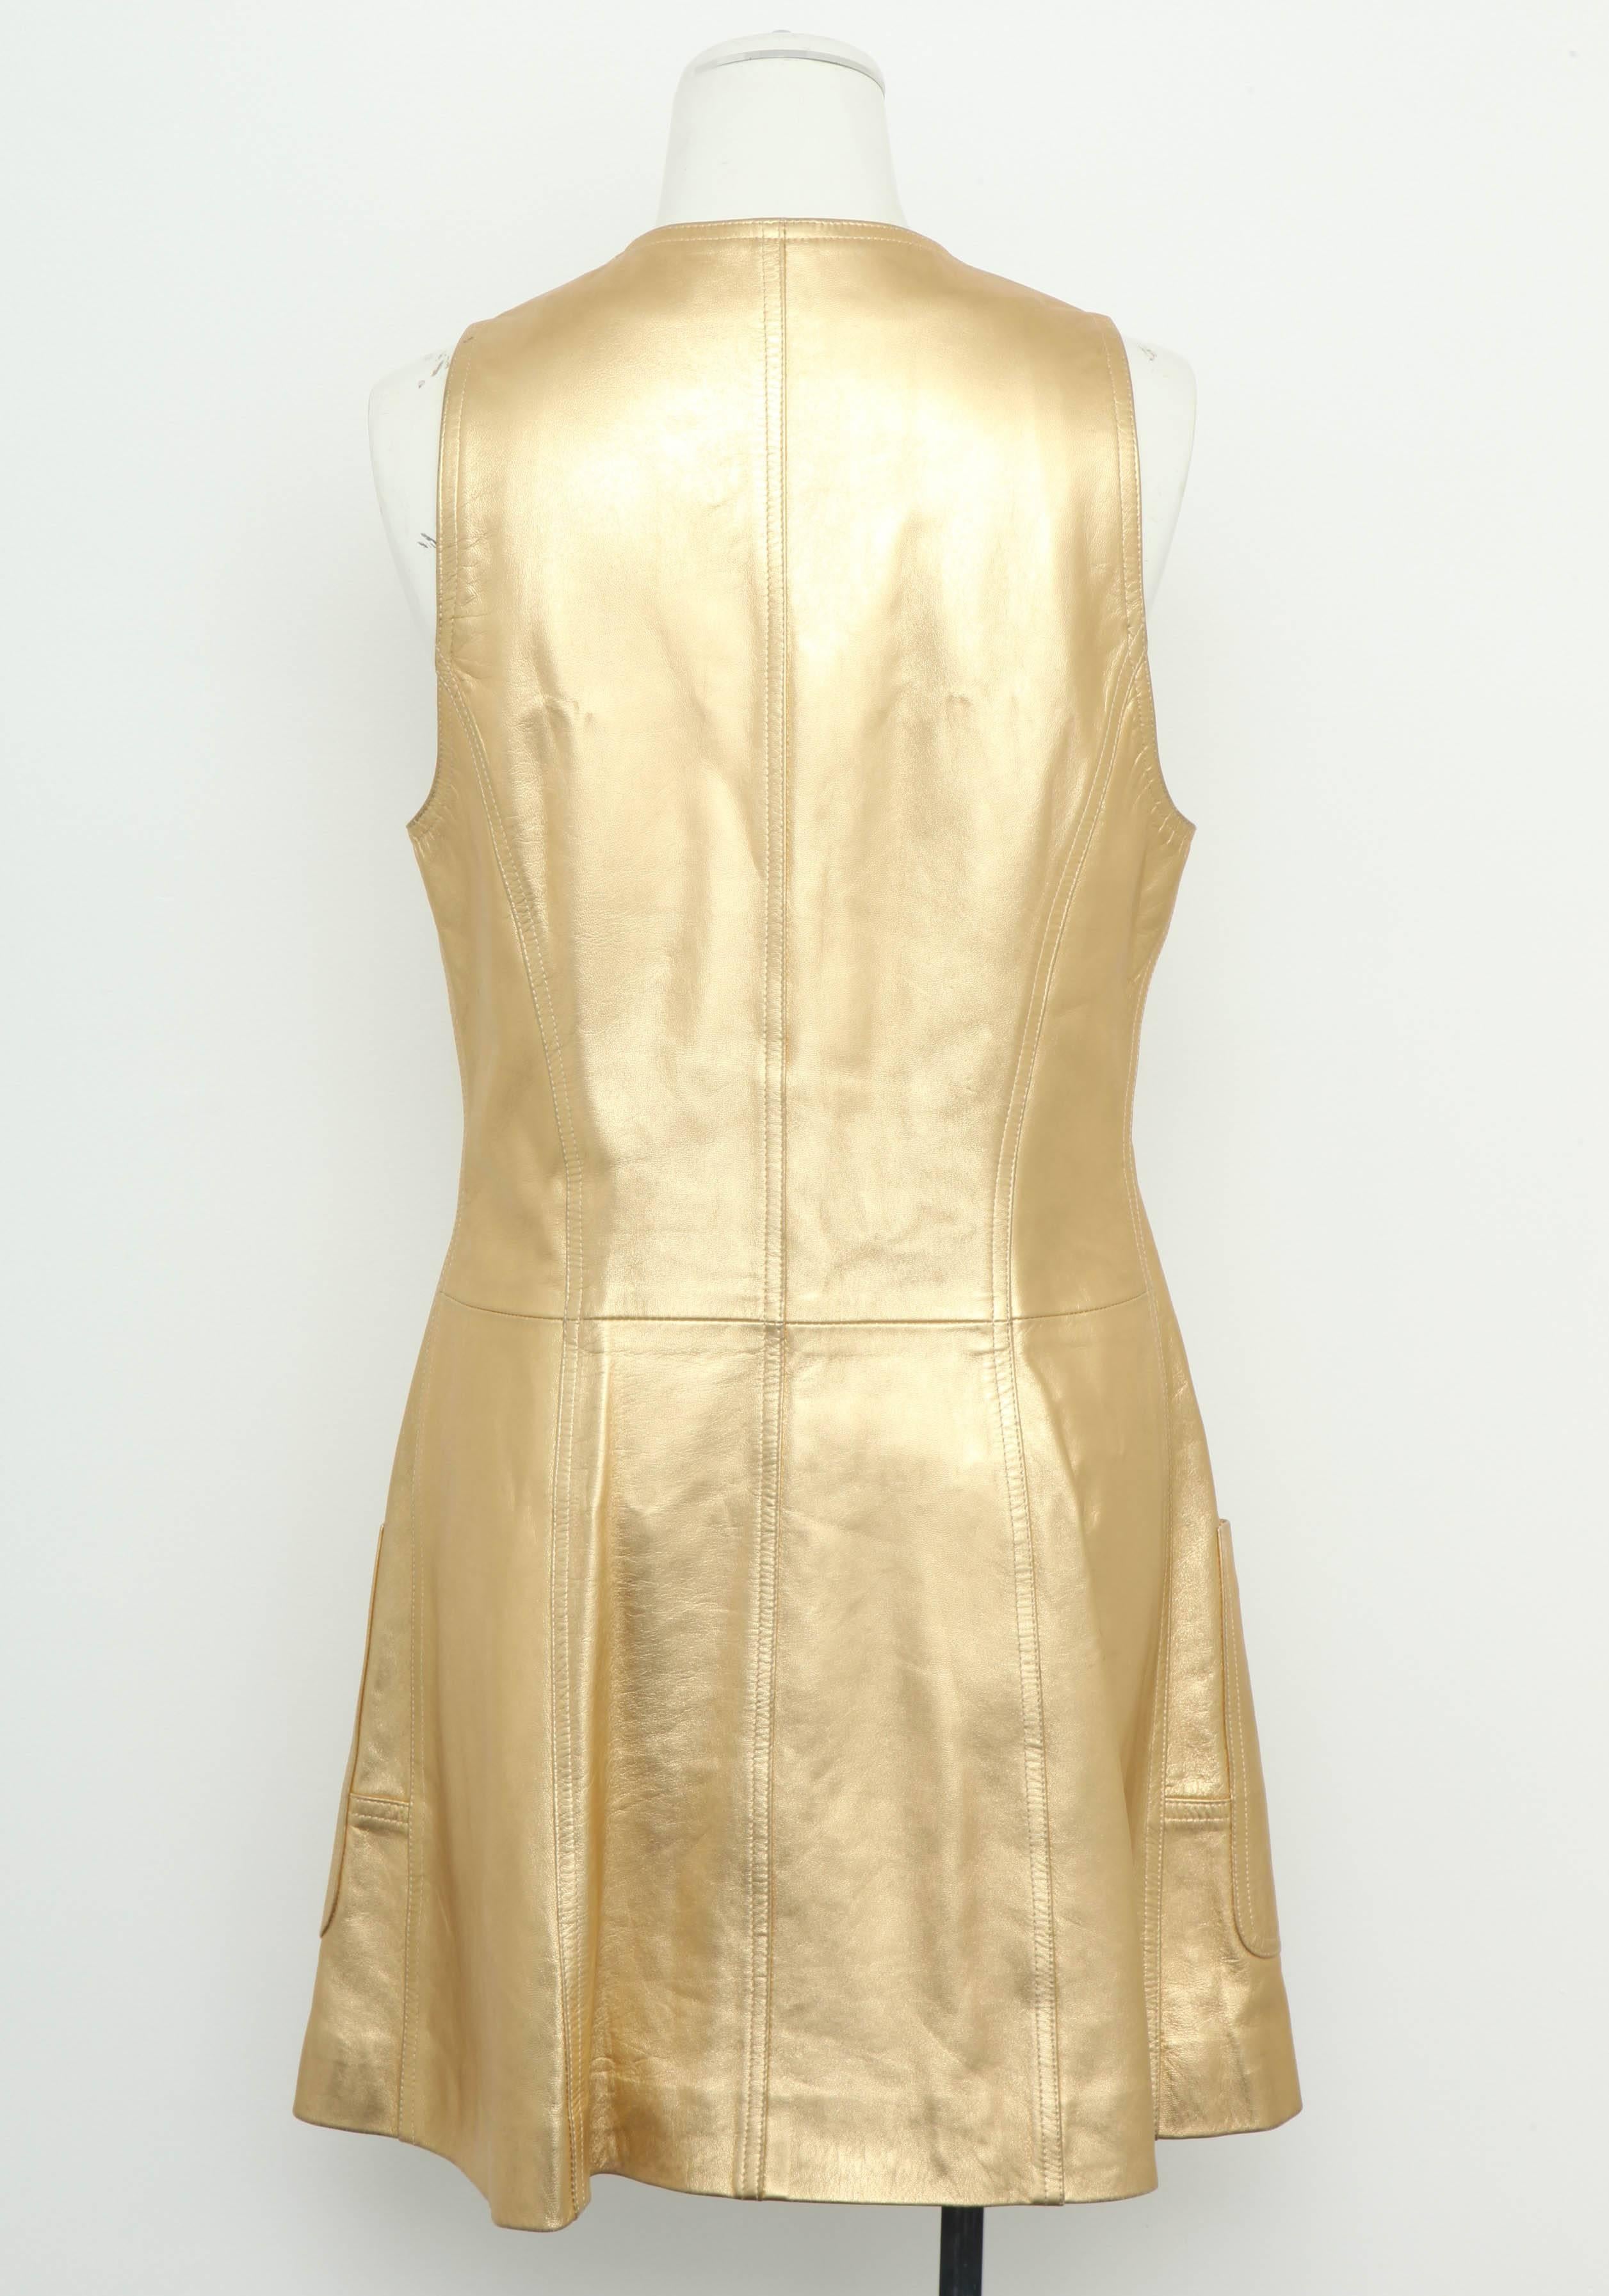 Vintage Chanel Gold Leather Vest Dress with CC Buttons 1980's For Sale 4